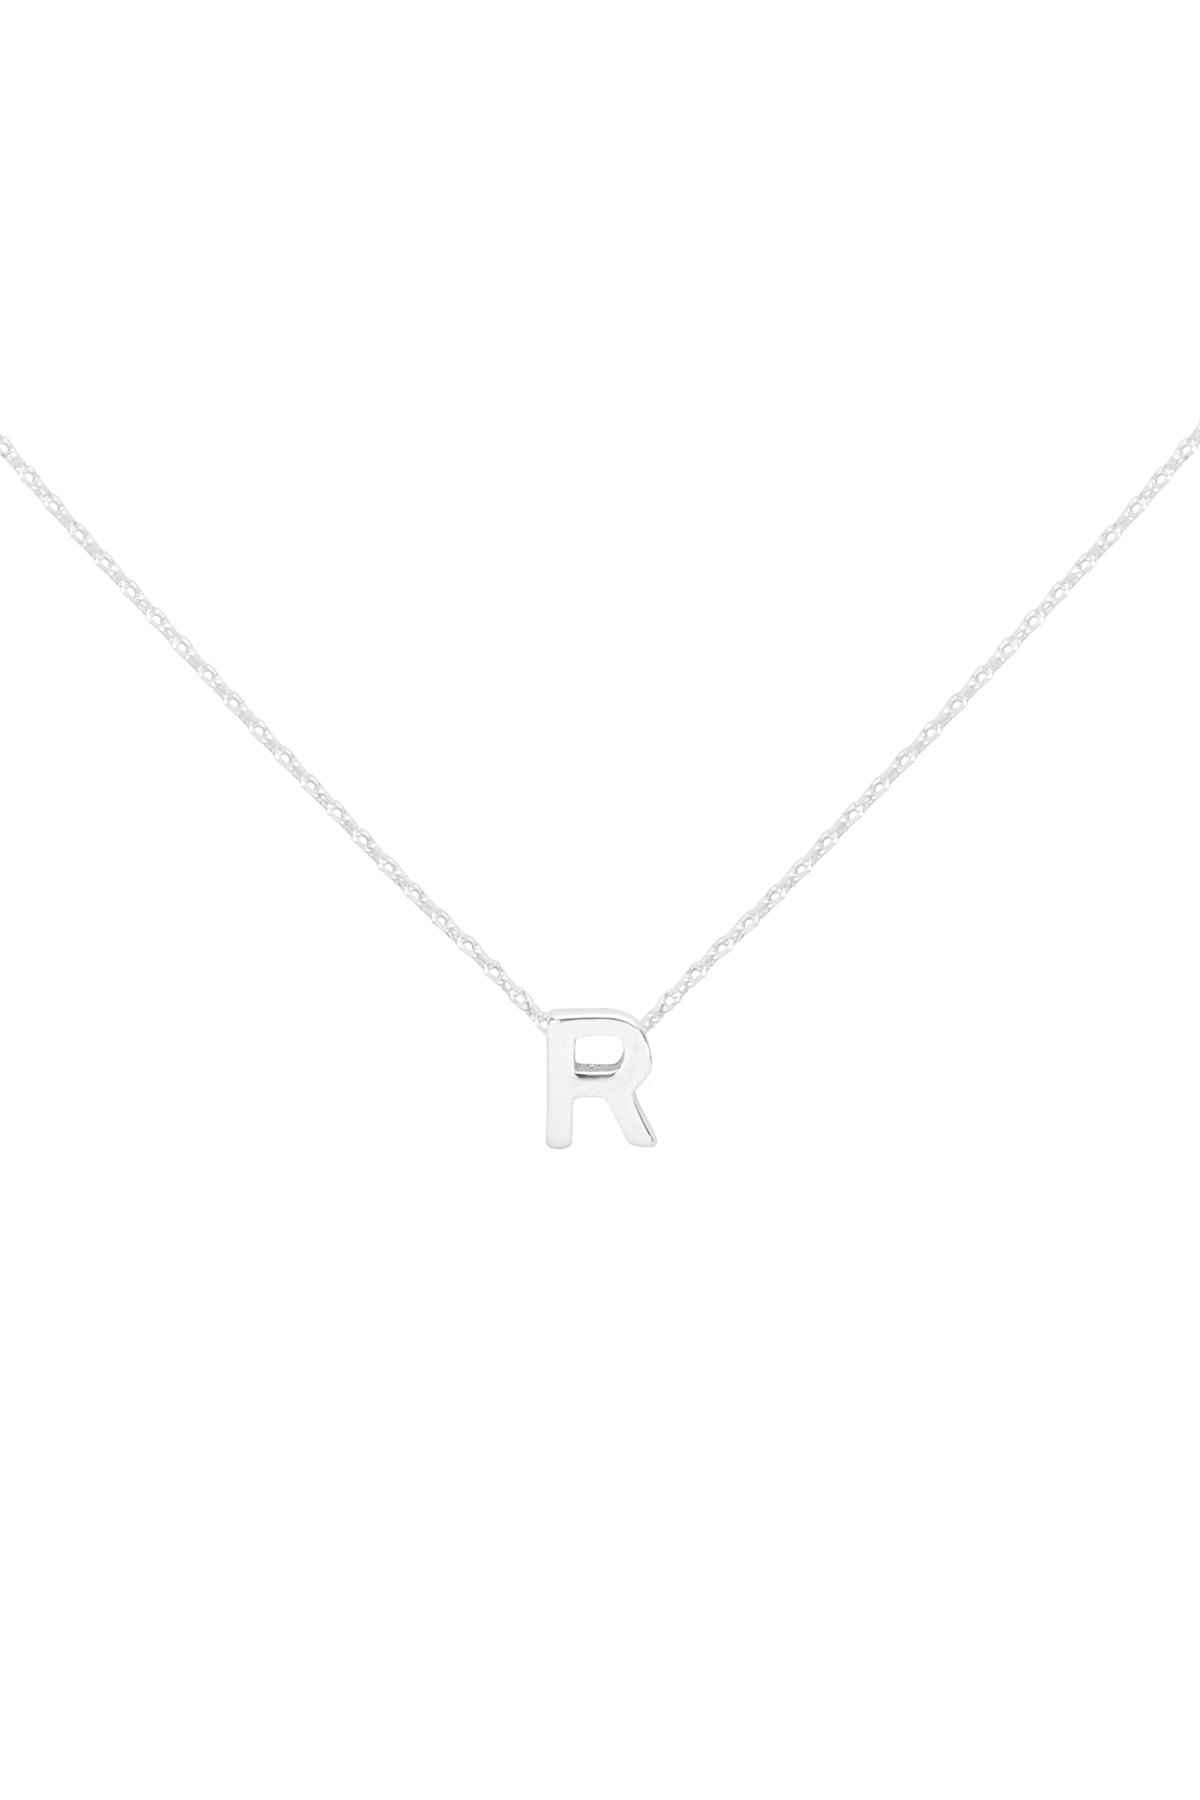 "R" INITIAL DAINTY CHARM NECKLACE